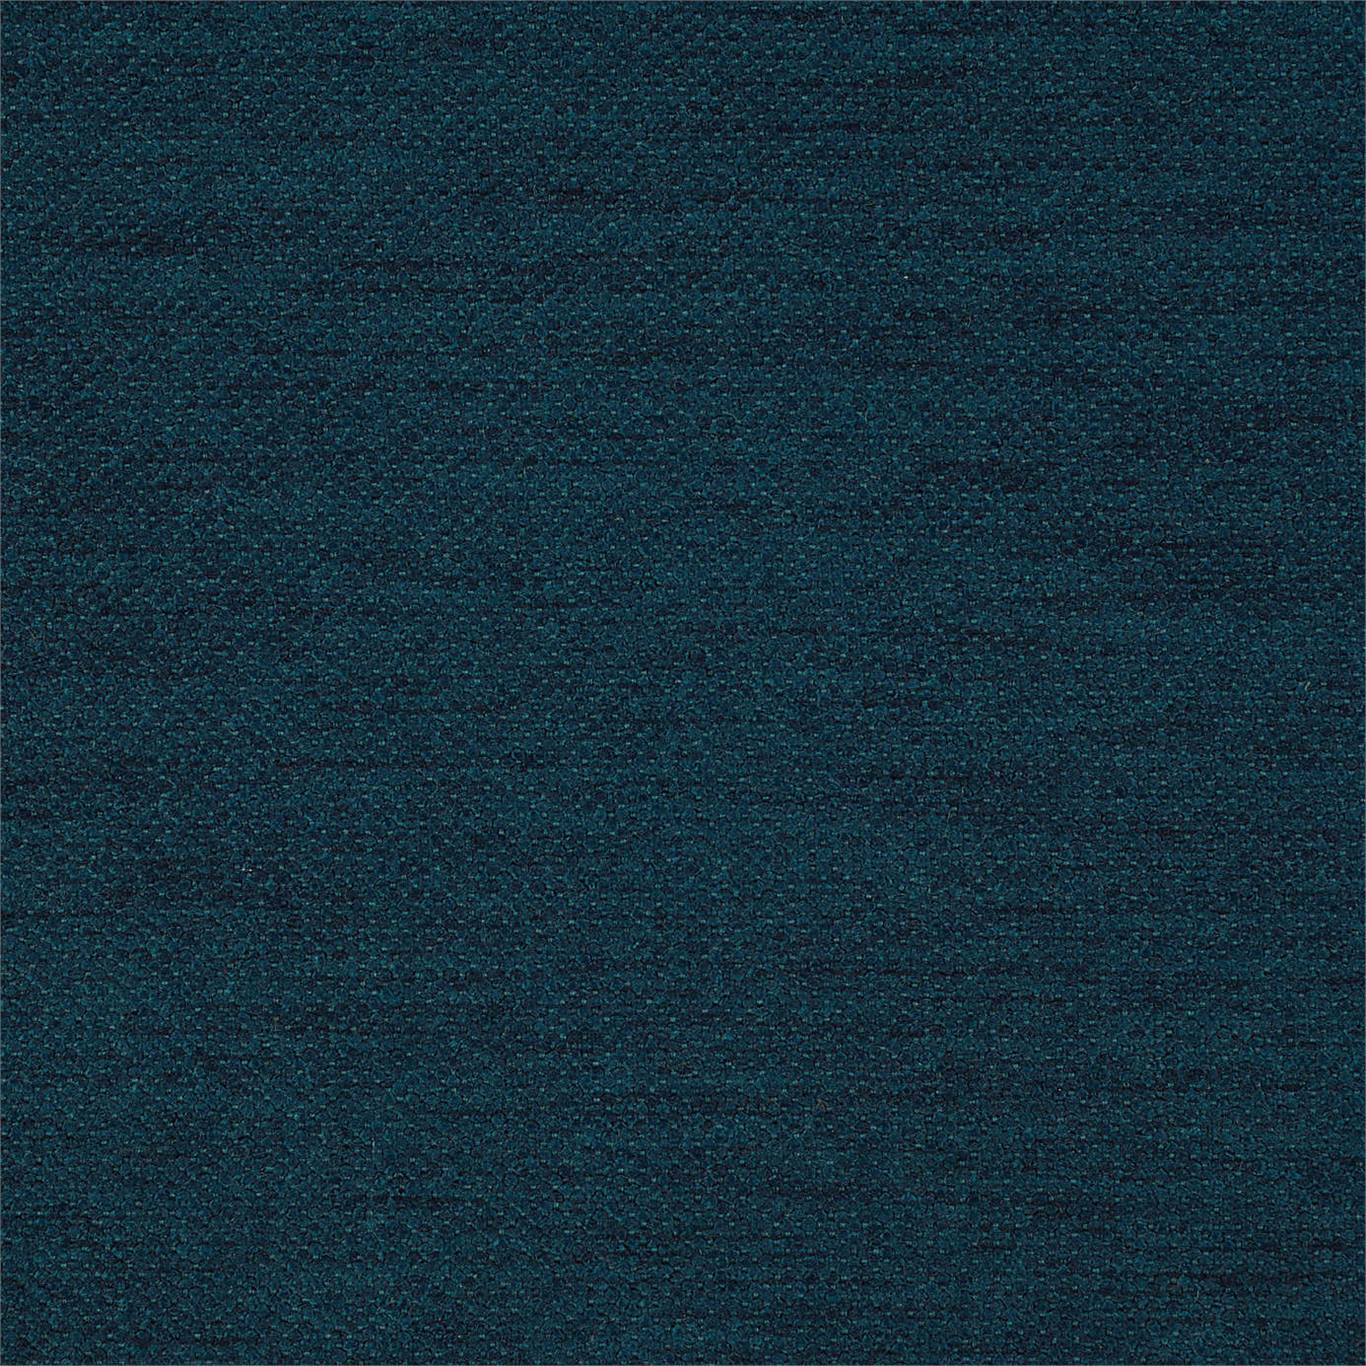 Factor Lake Fabric by HAR